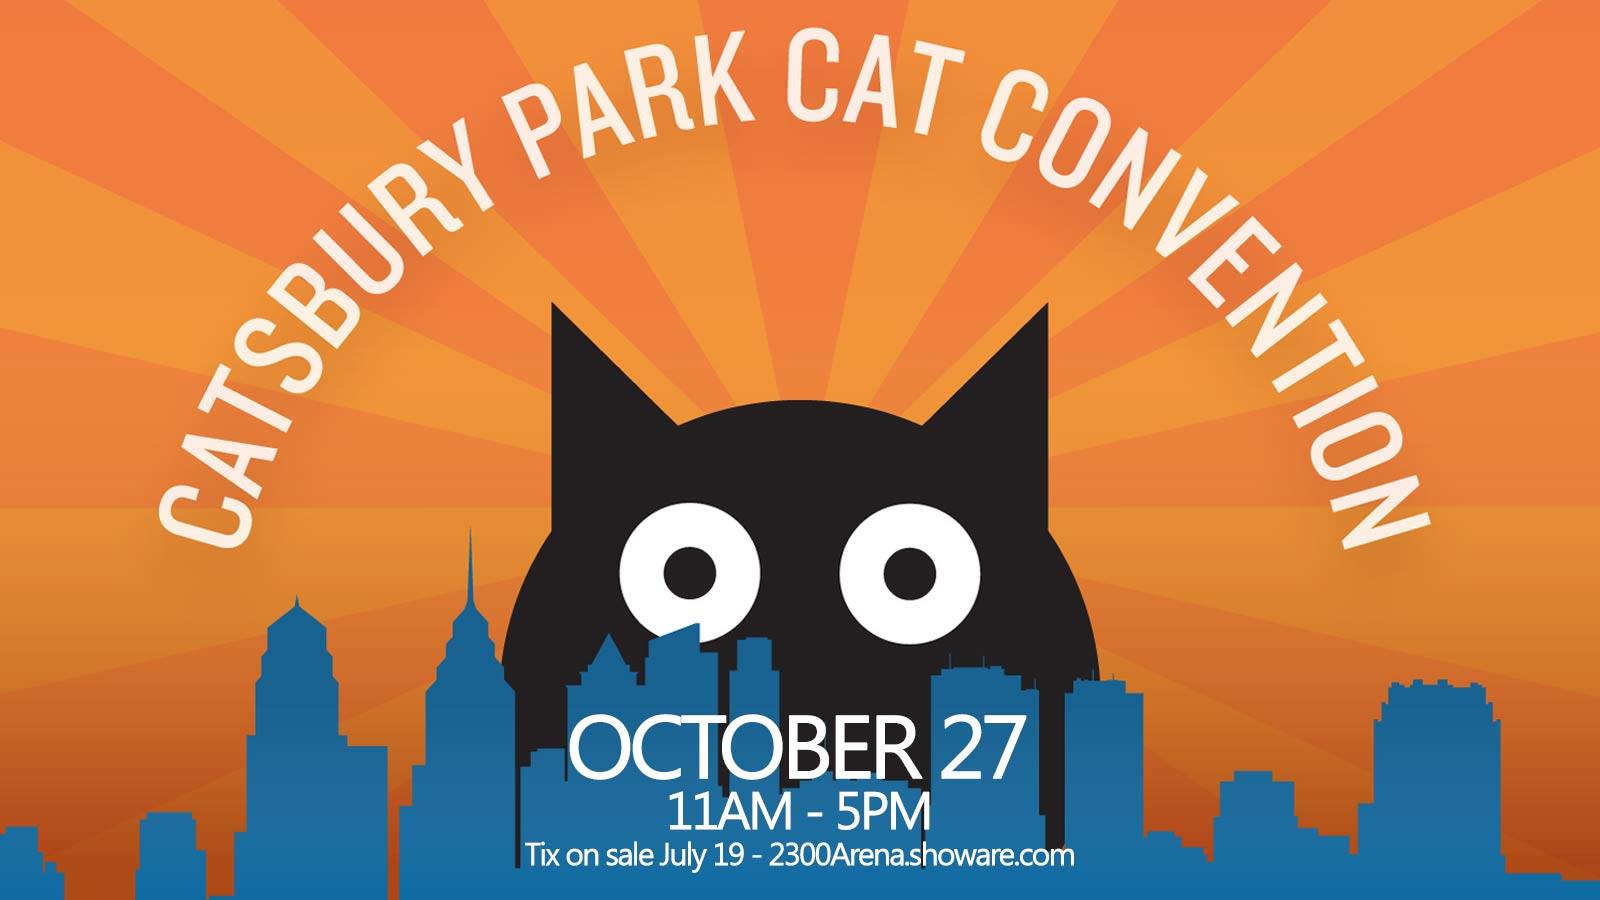 Come see Kitty Rotten at the Catsbury Park Cat Convention in Philadelphia on October 27th!